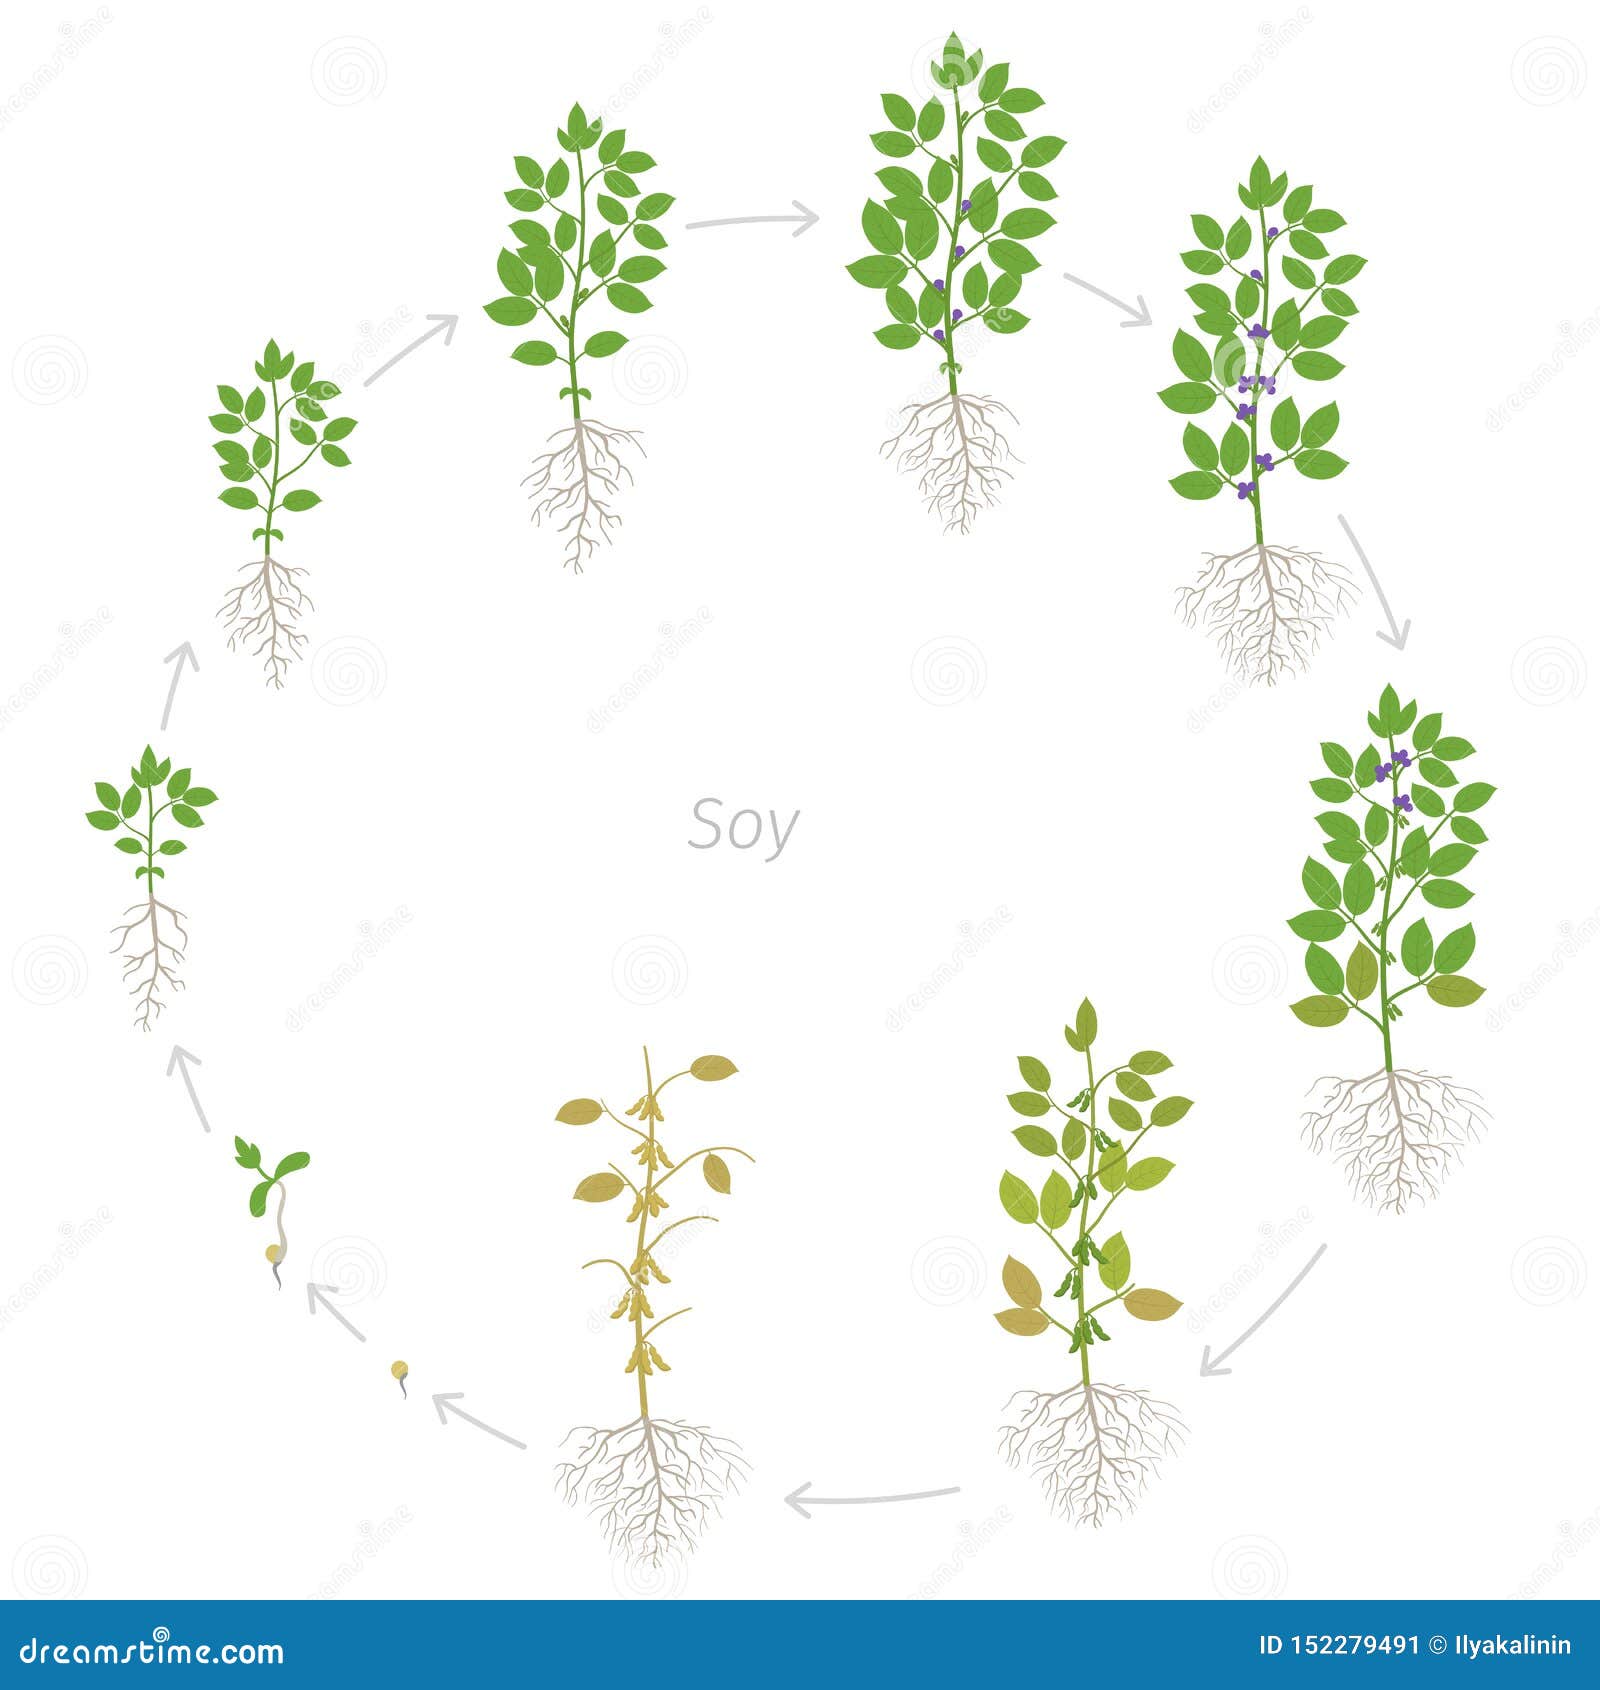 Soybean Plant Stages